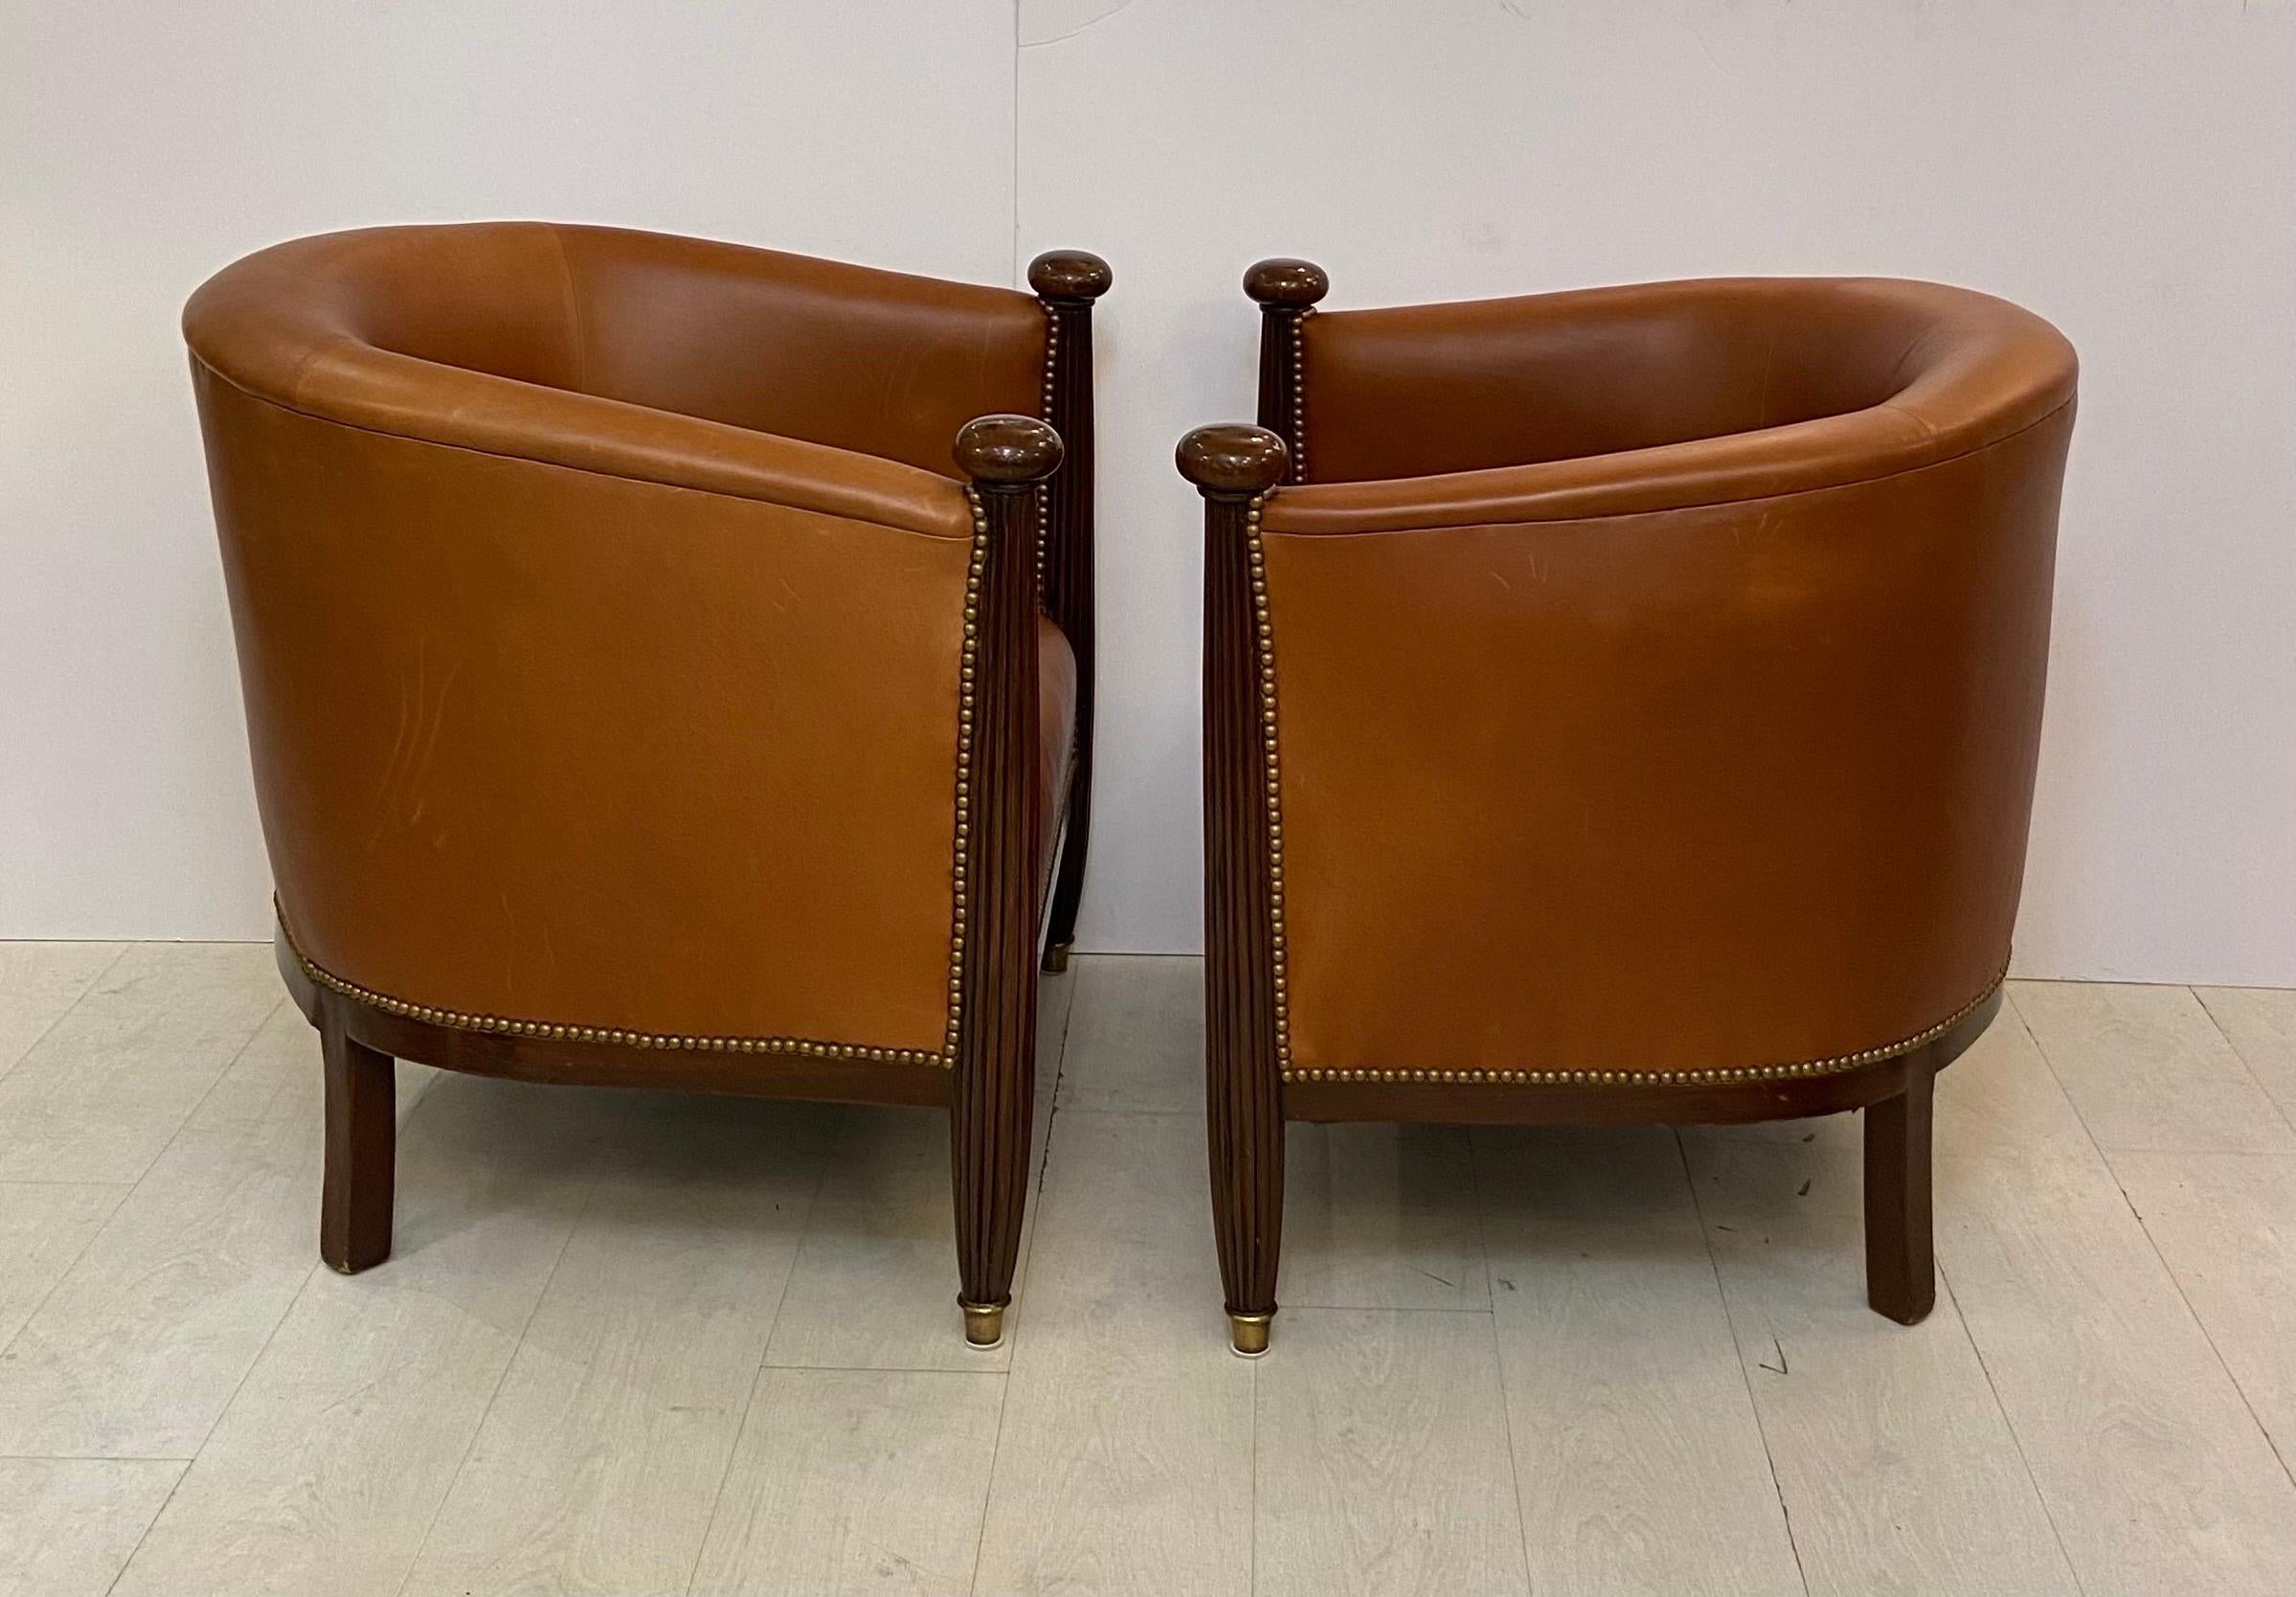 Hand-Crafted Pair of French Art Deco Mahogany Barrel Chairs Upholstered in Fine Leather 